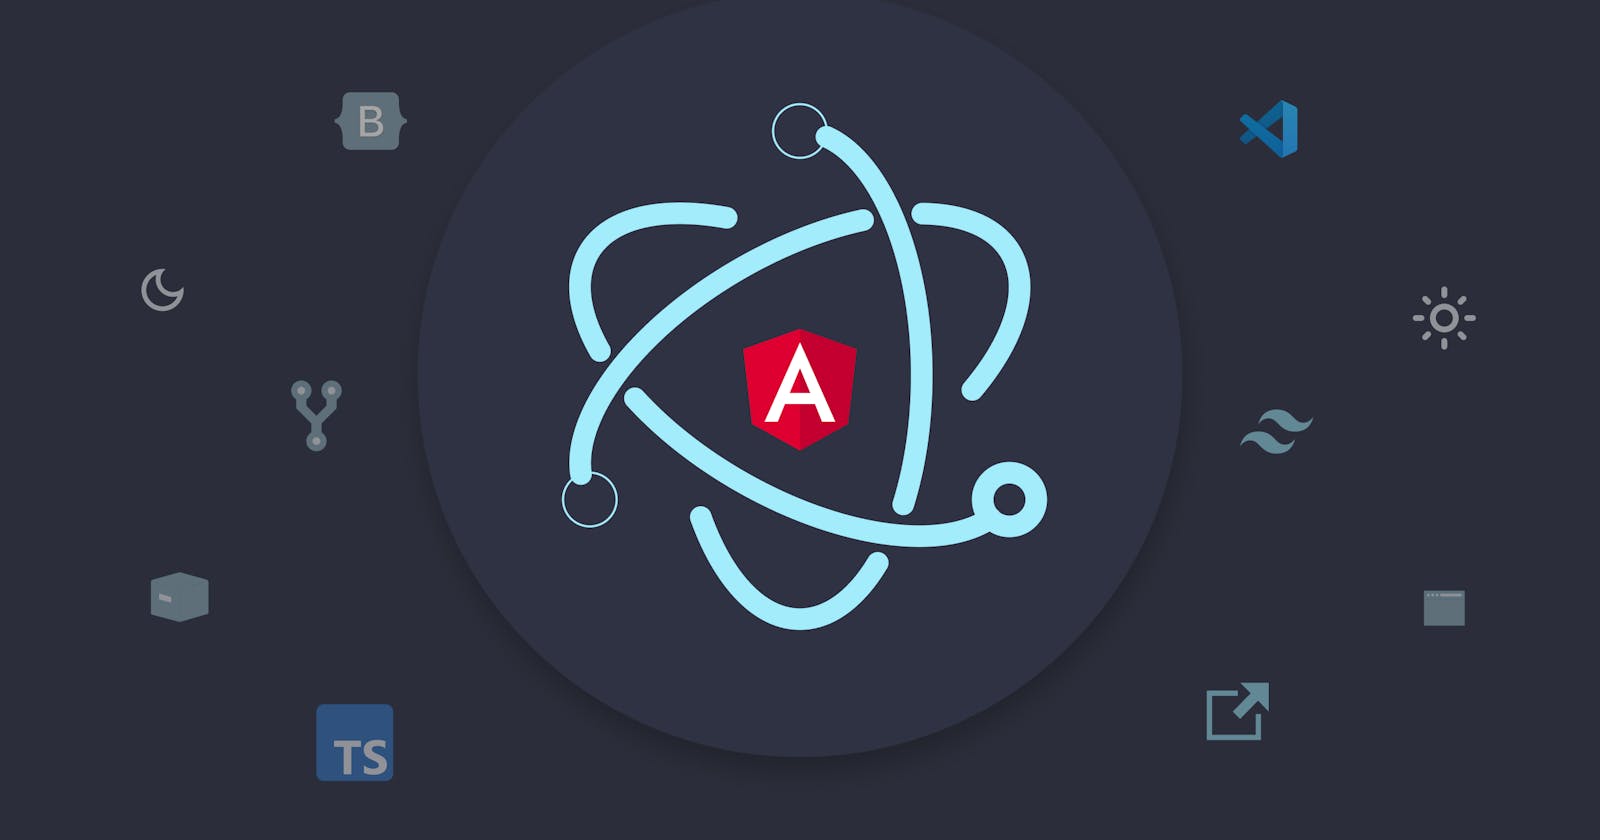 Building Desktop Apps with Electron JS: Part 1 - Getting Started with Electron